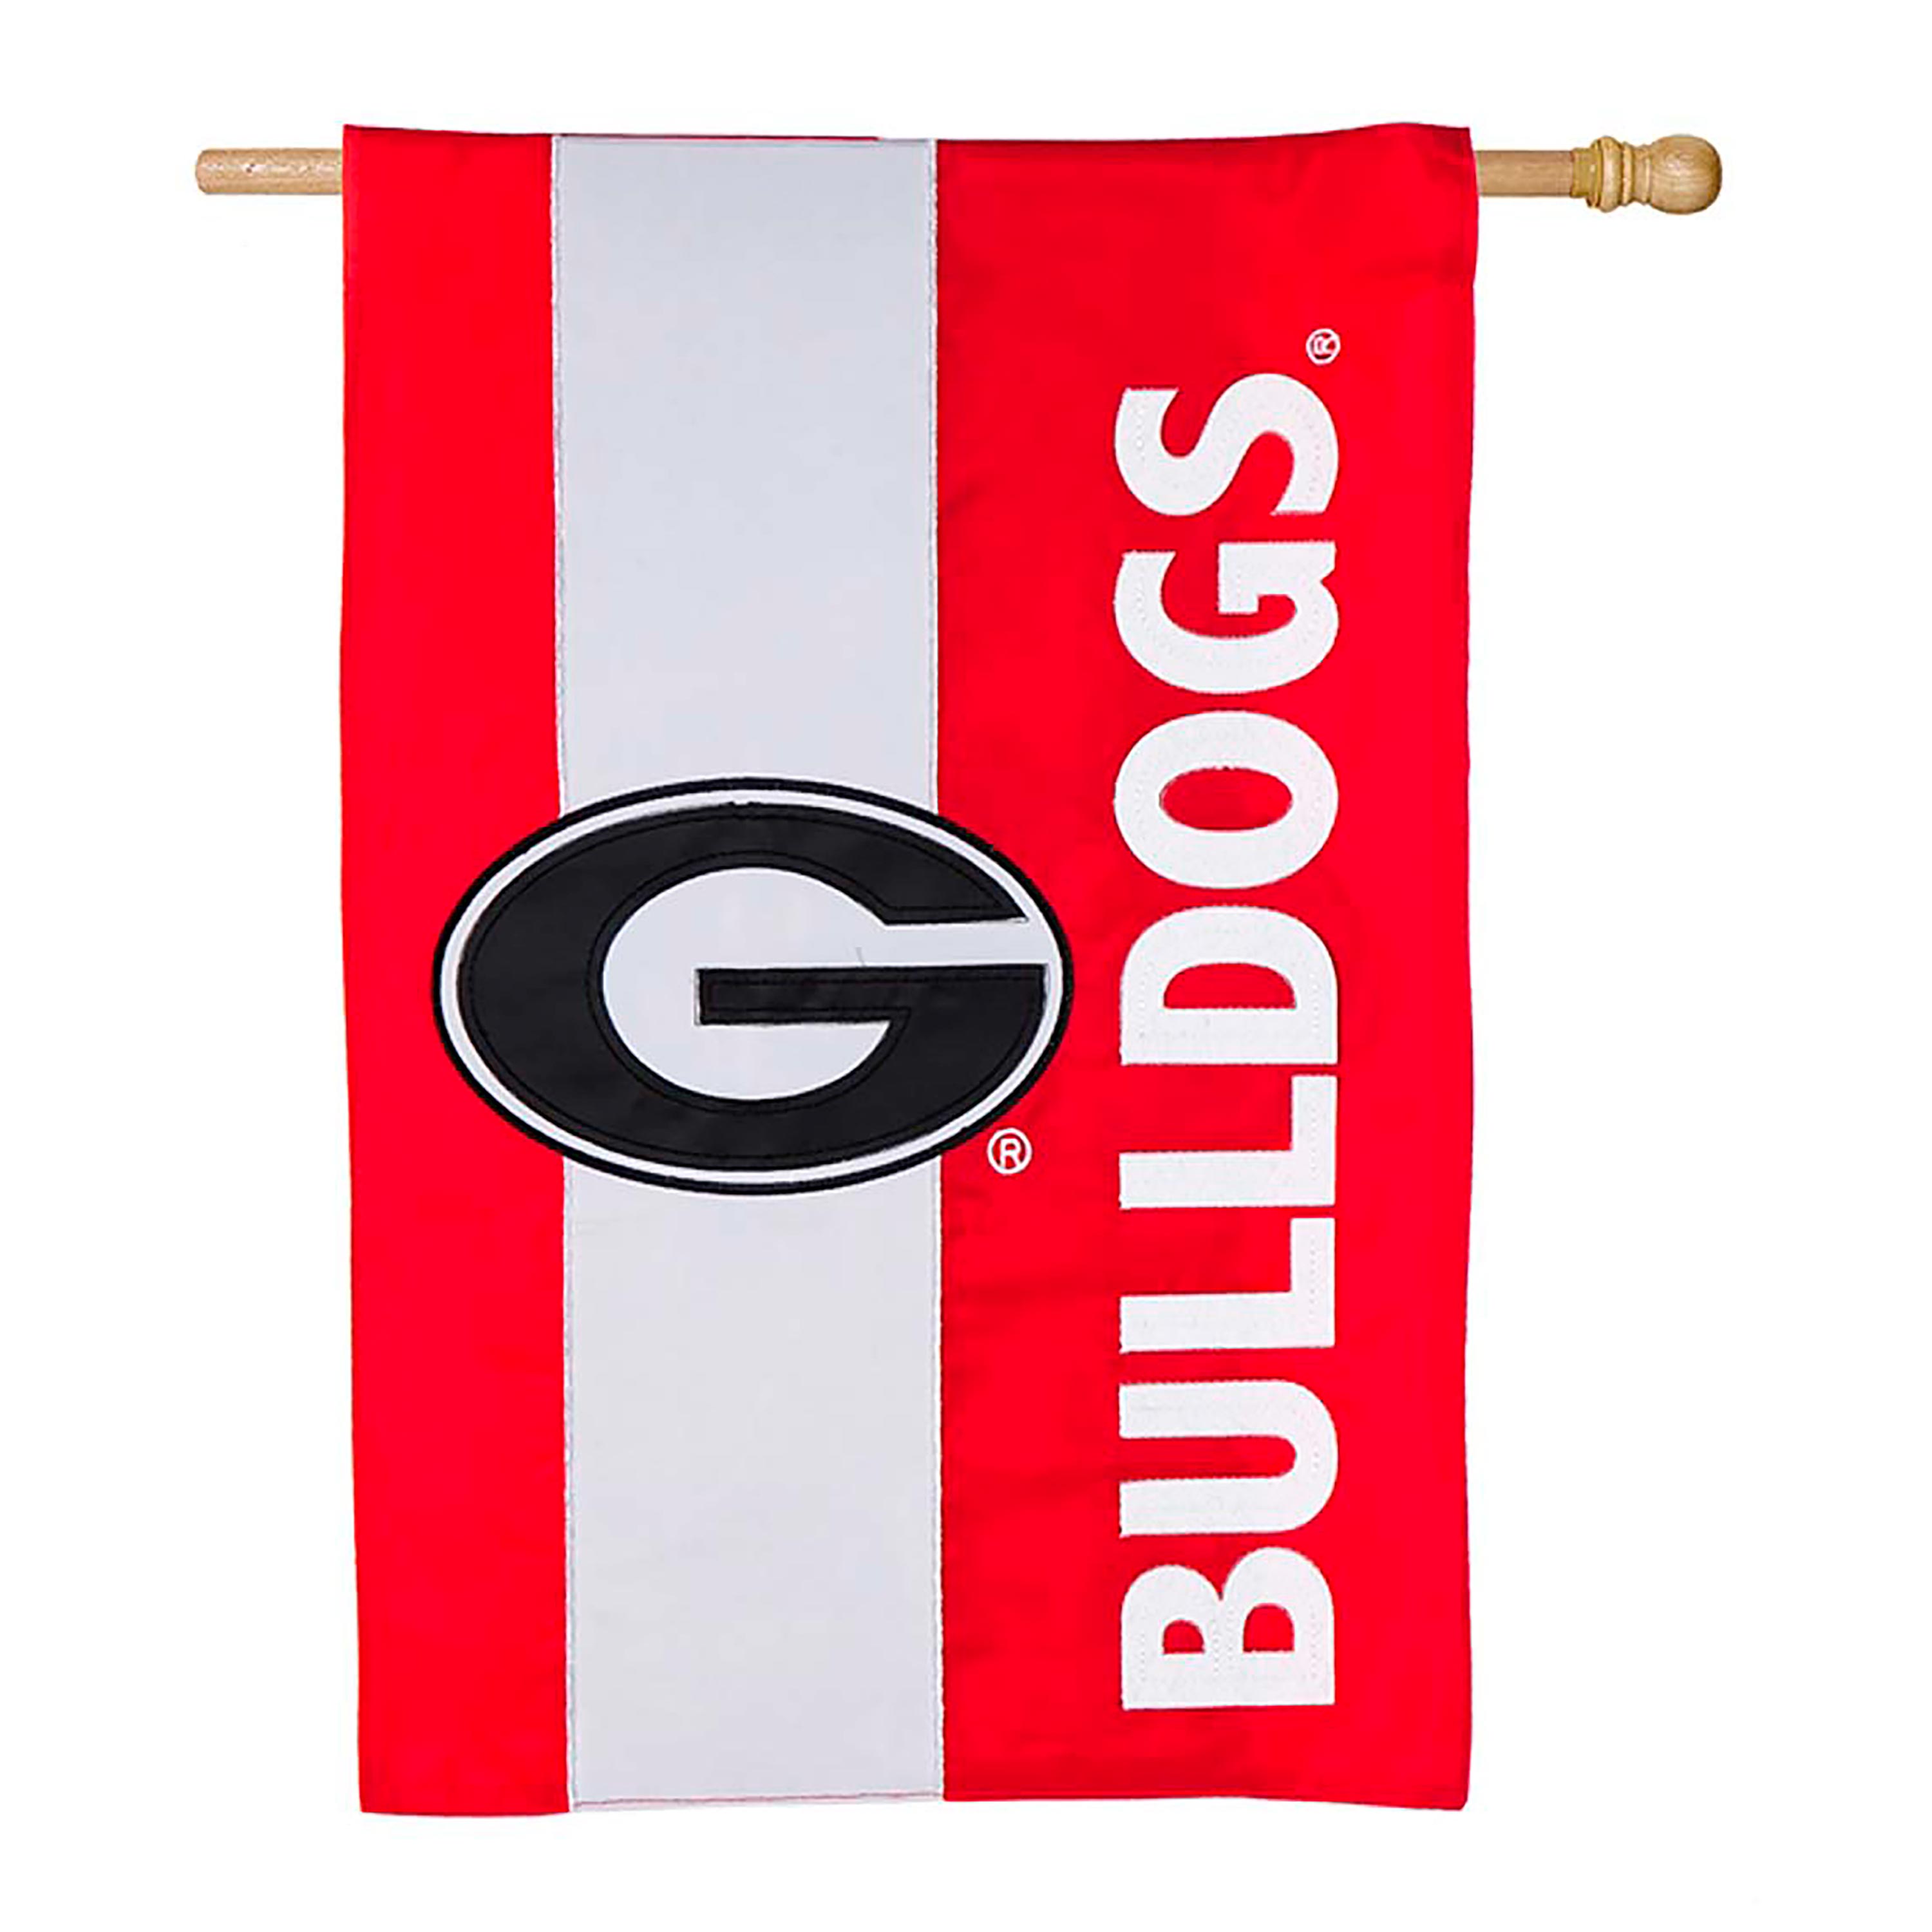 Double-Sided Embellished College Team Pride Applique House Flag - Univ of Georgia